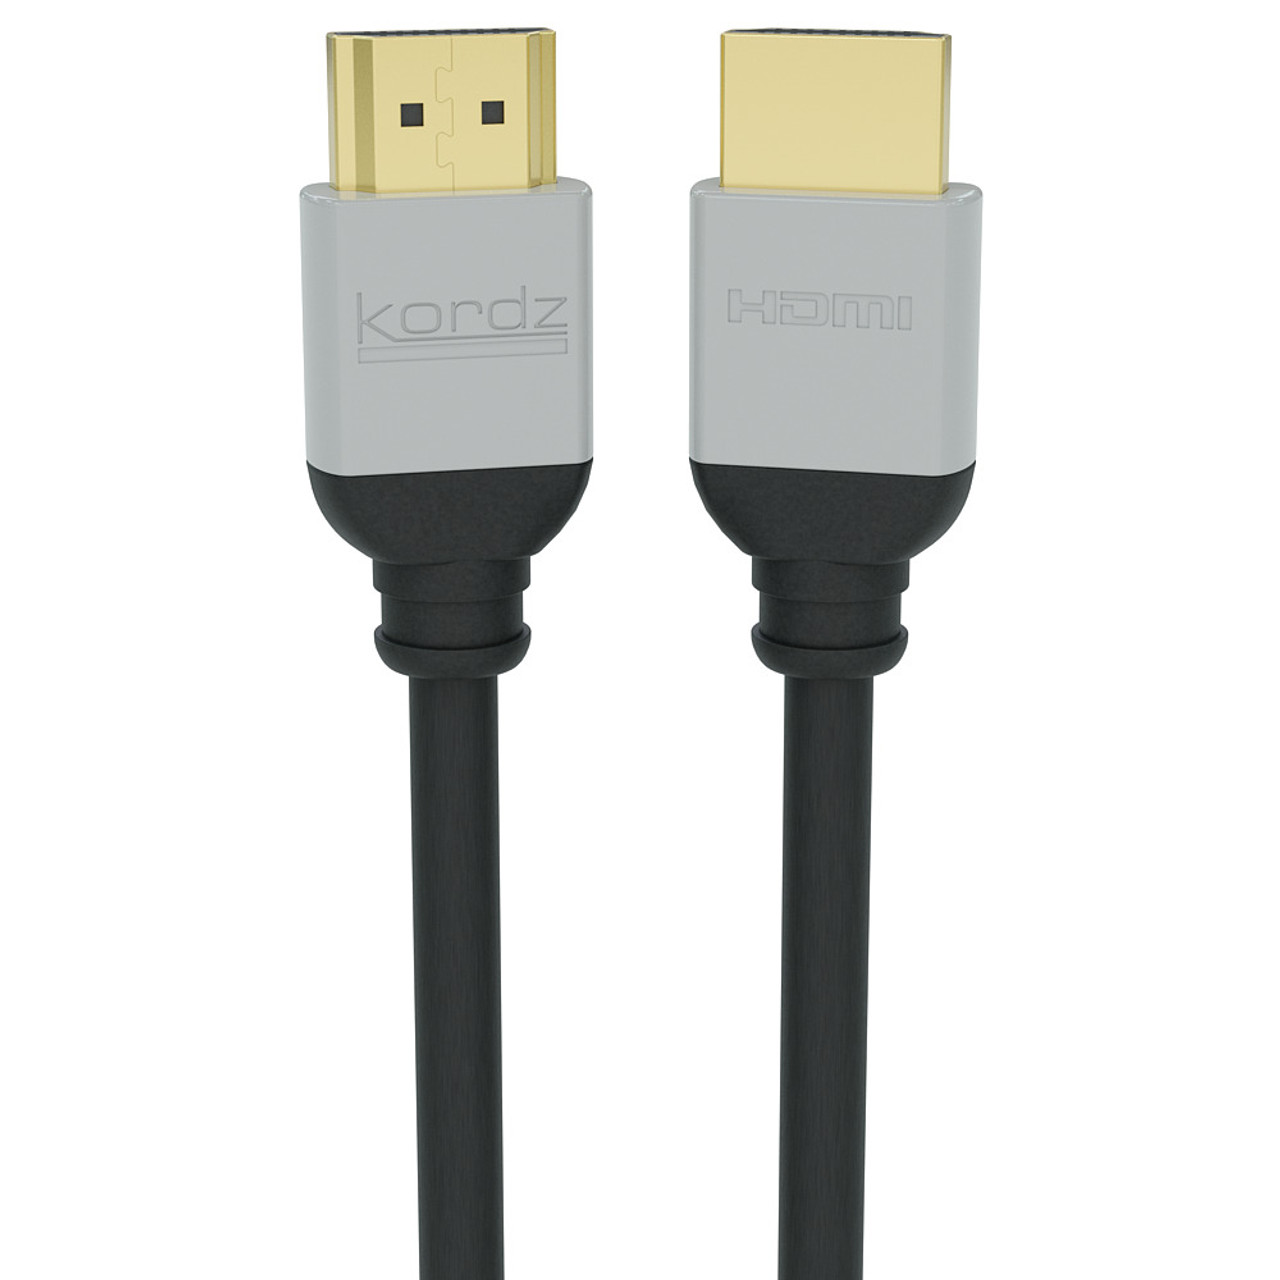 Kordz Pro3 Series 4K60 HDR 18Gbps HDMI 2.0 Cables (0.5 - 9m)